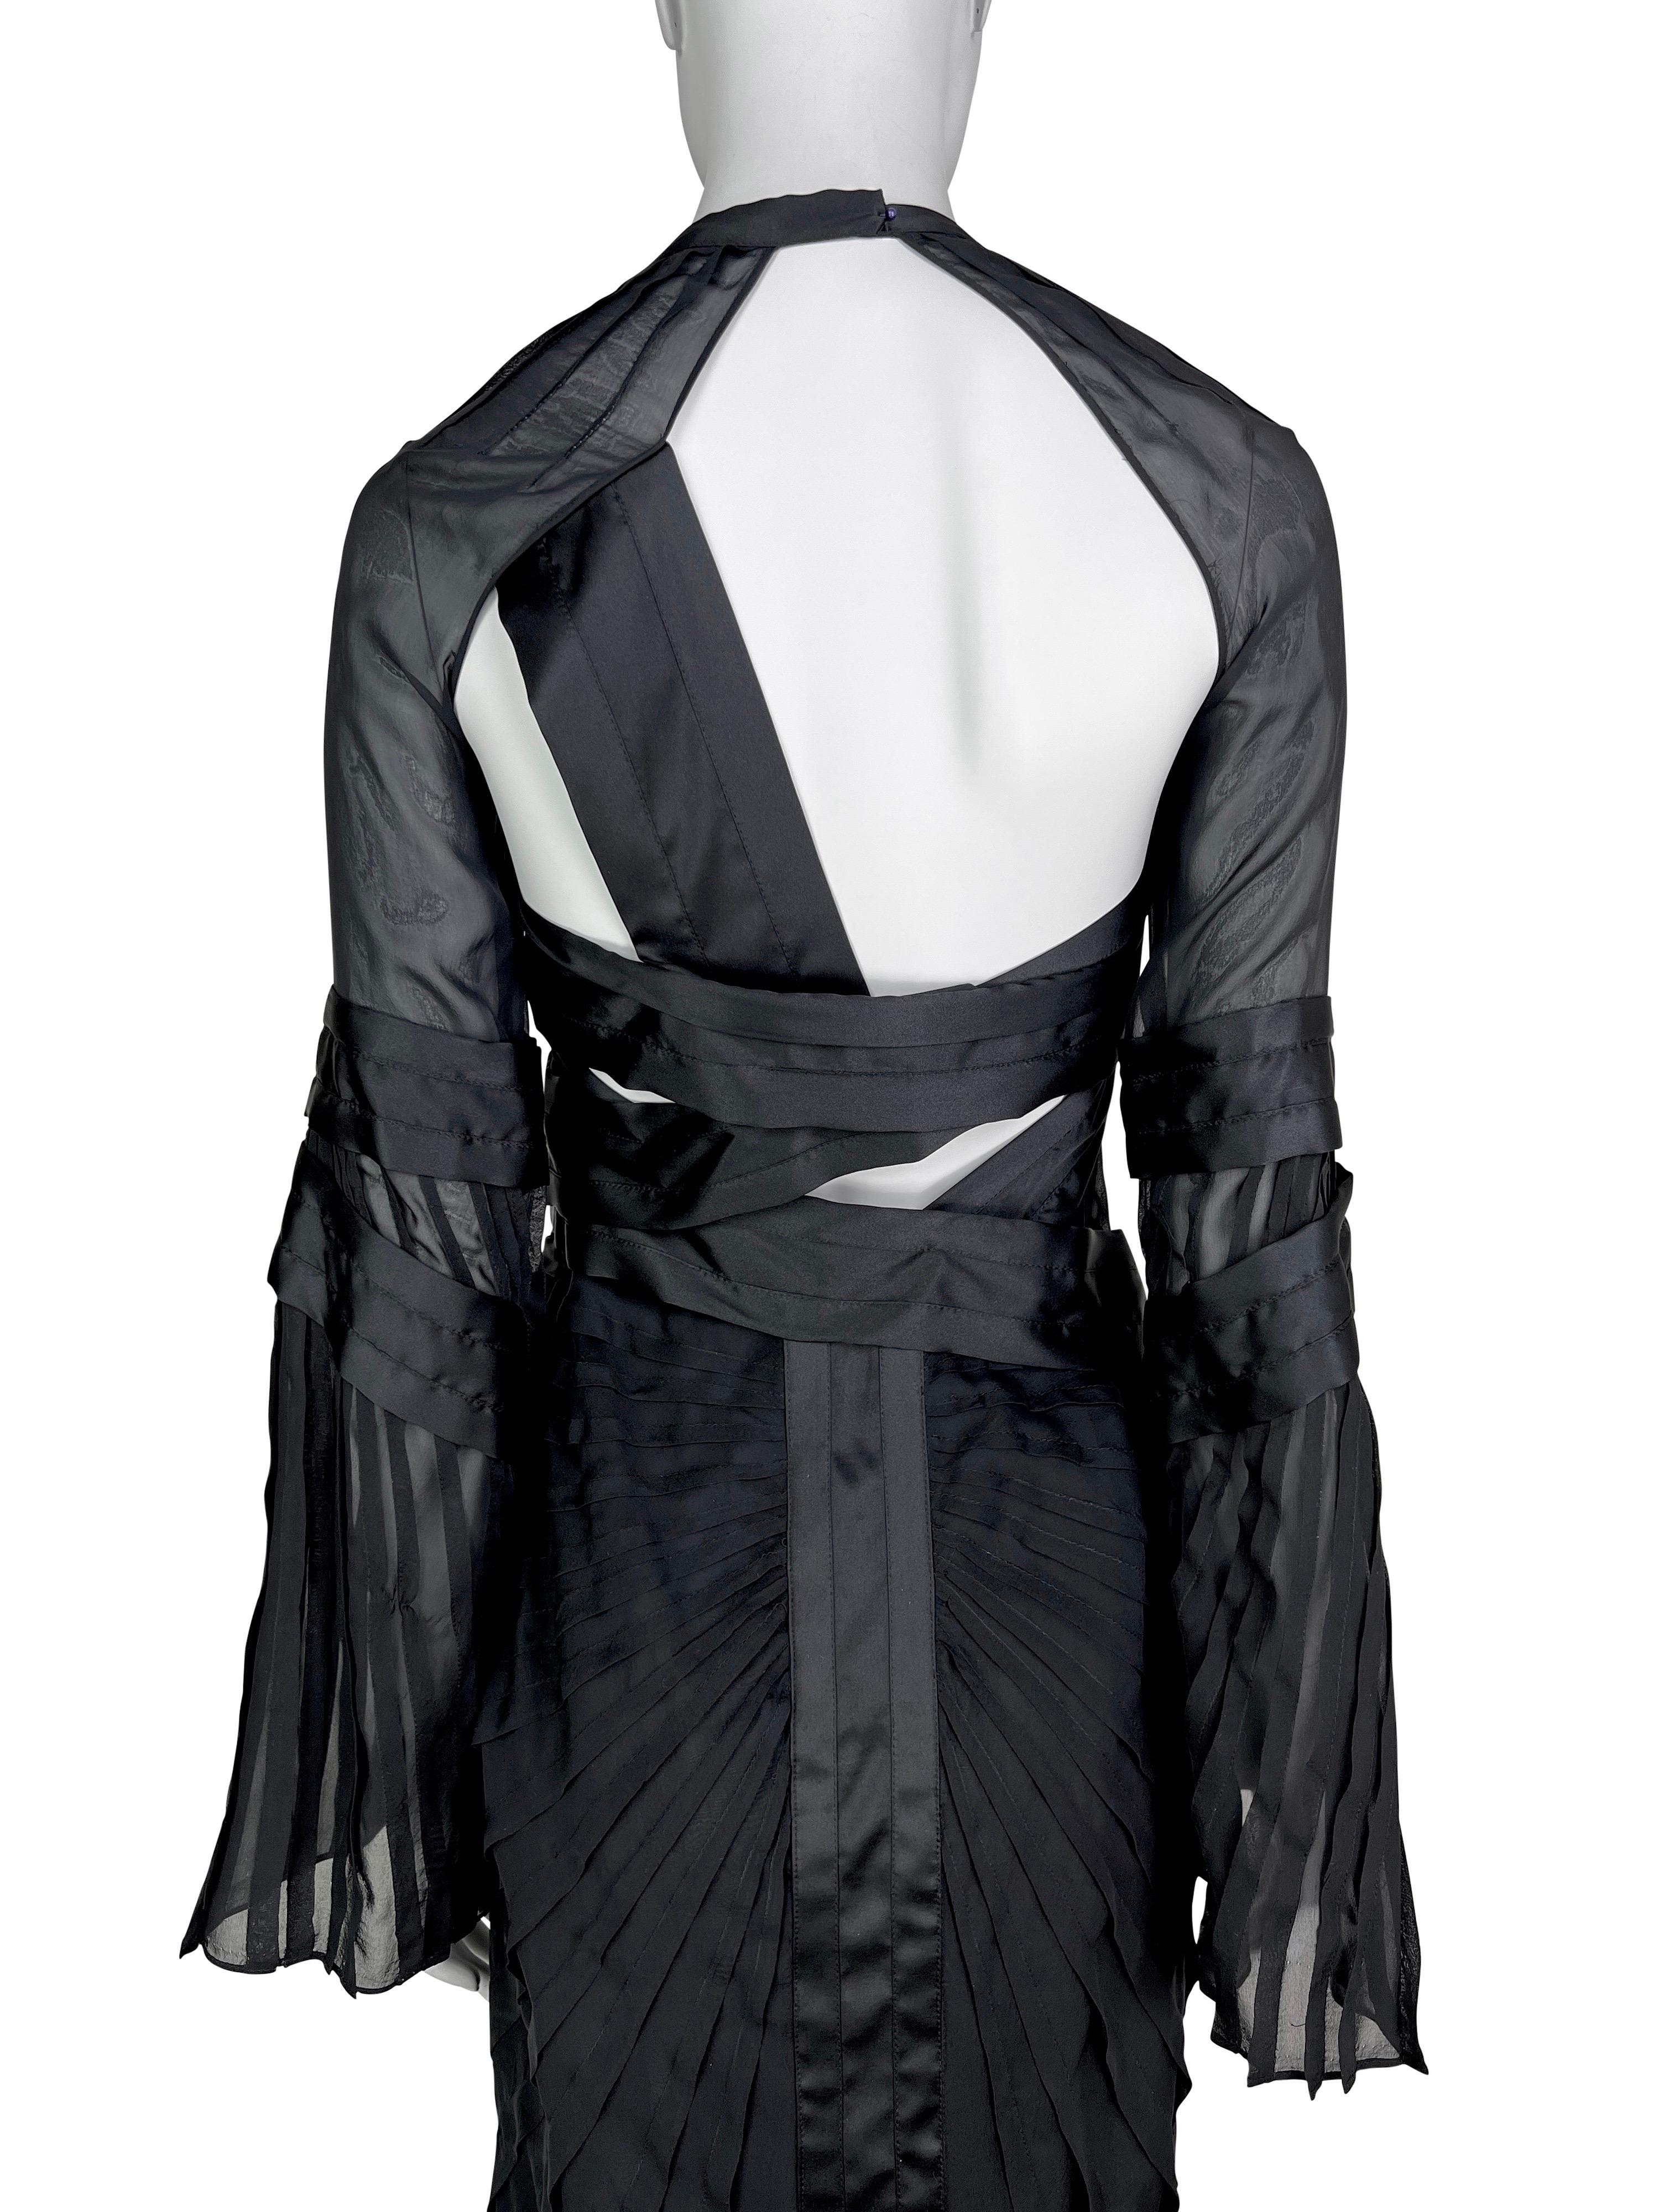 Gucci by Tom Ford Fall 2004 Pleated Bondage Silk Dress For Sale 6